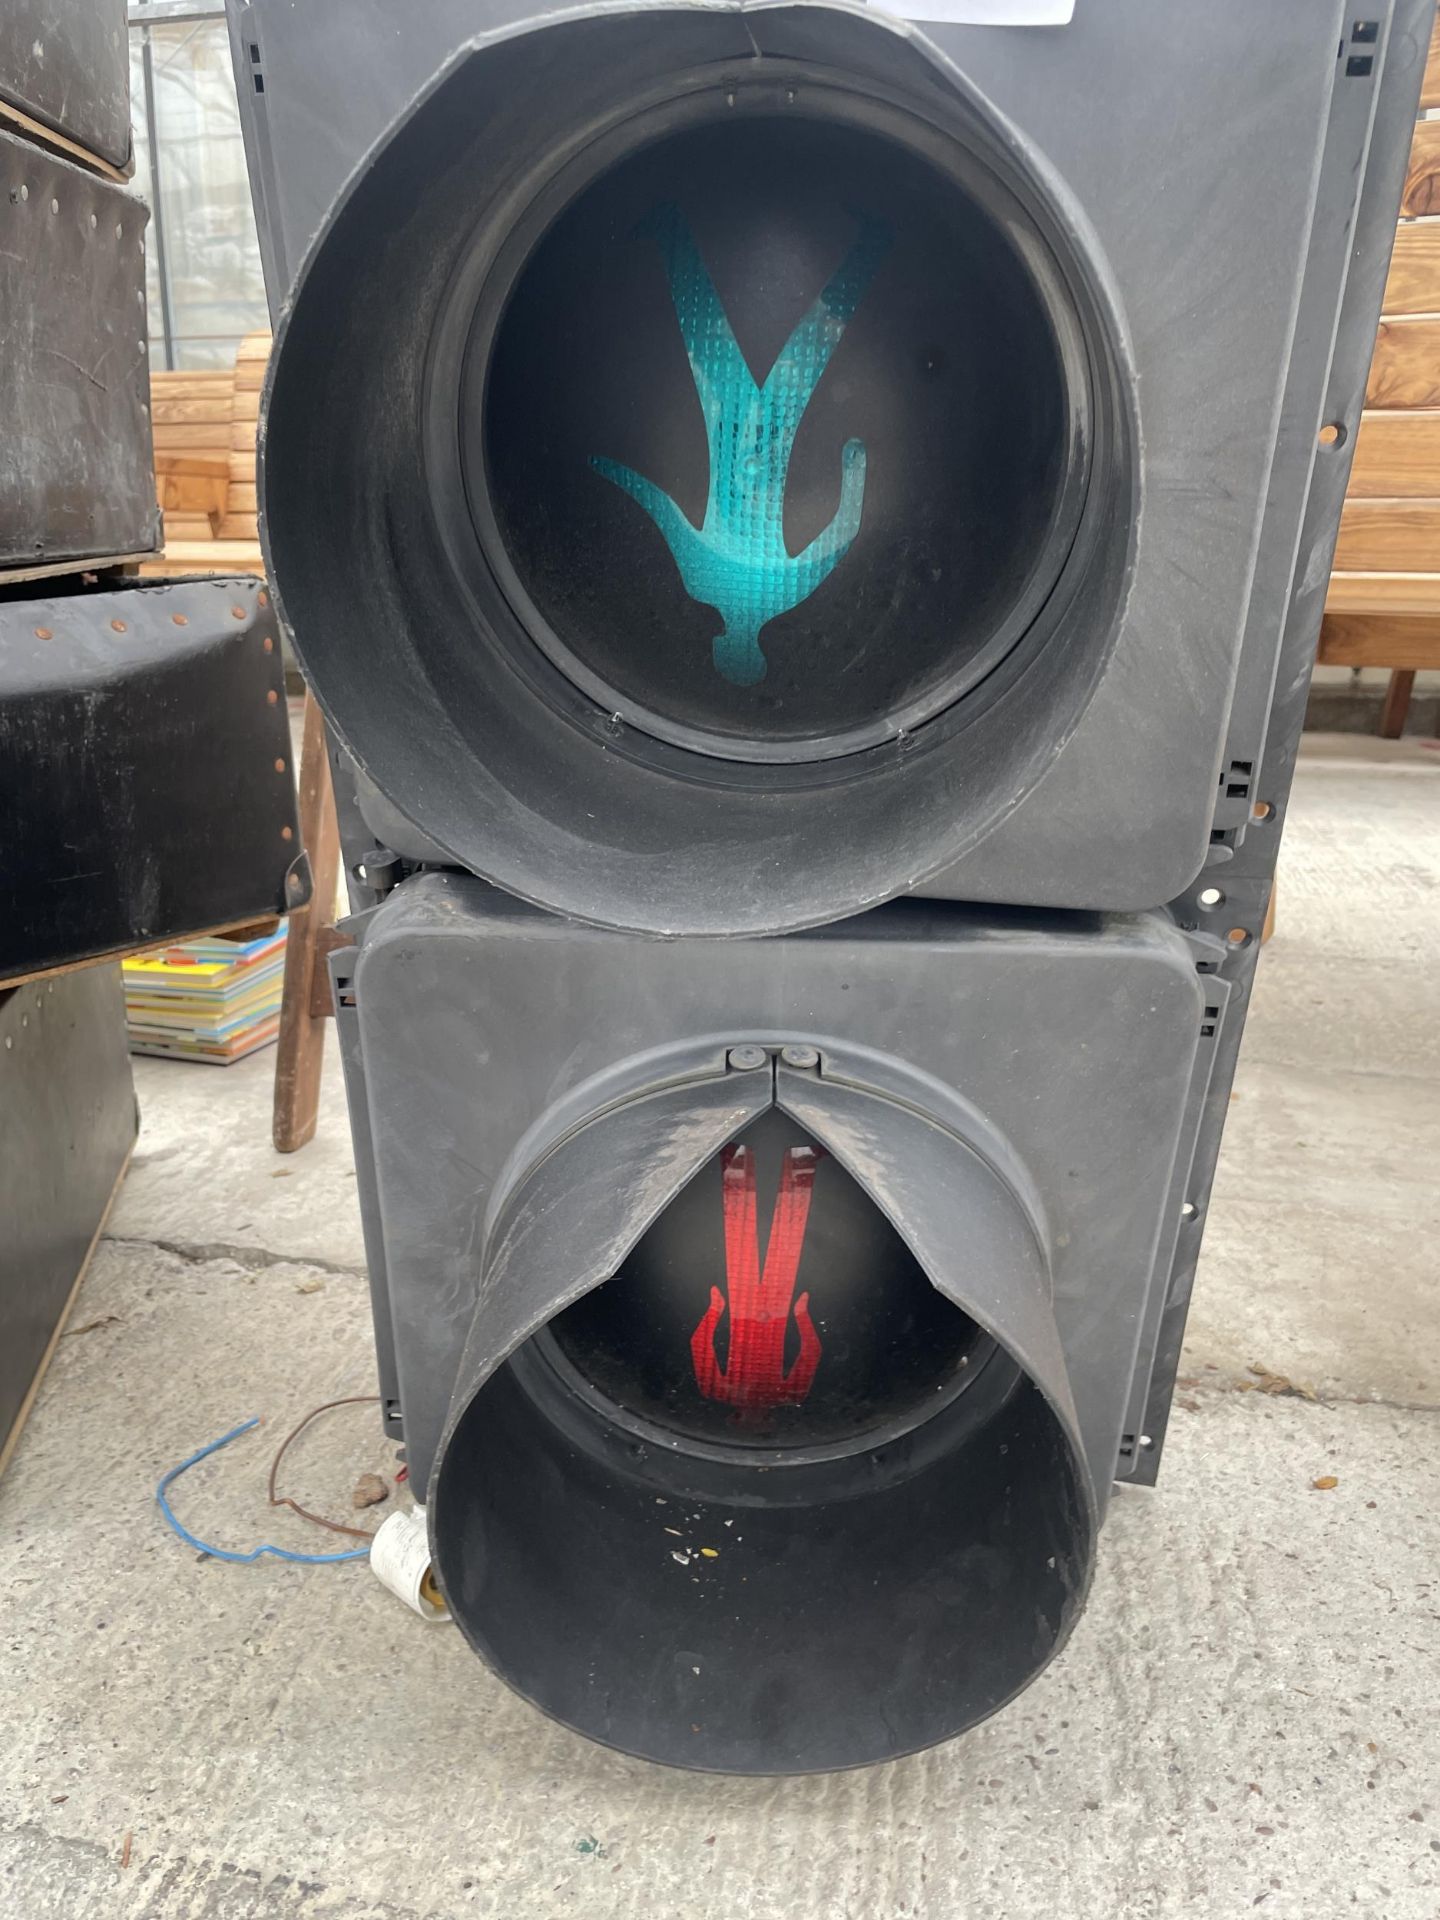 A SET OFPEDESTRIAN CROSSING SIGNAL LIGHTS - Image 2 of 2